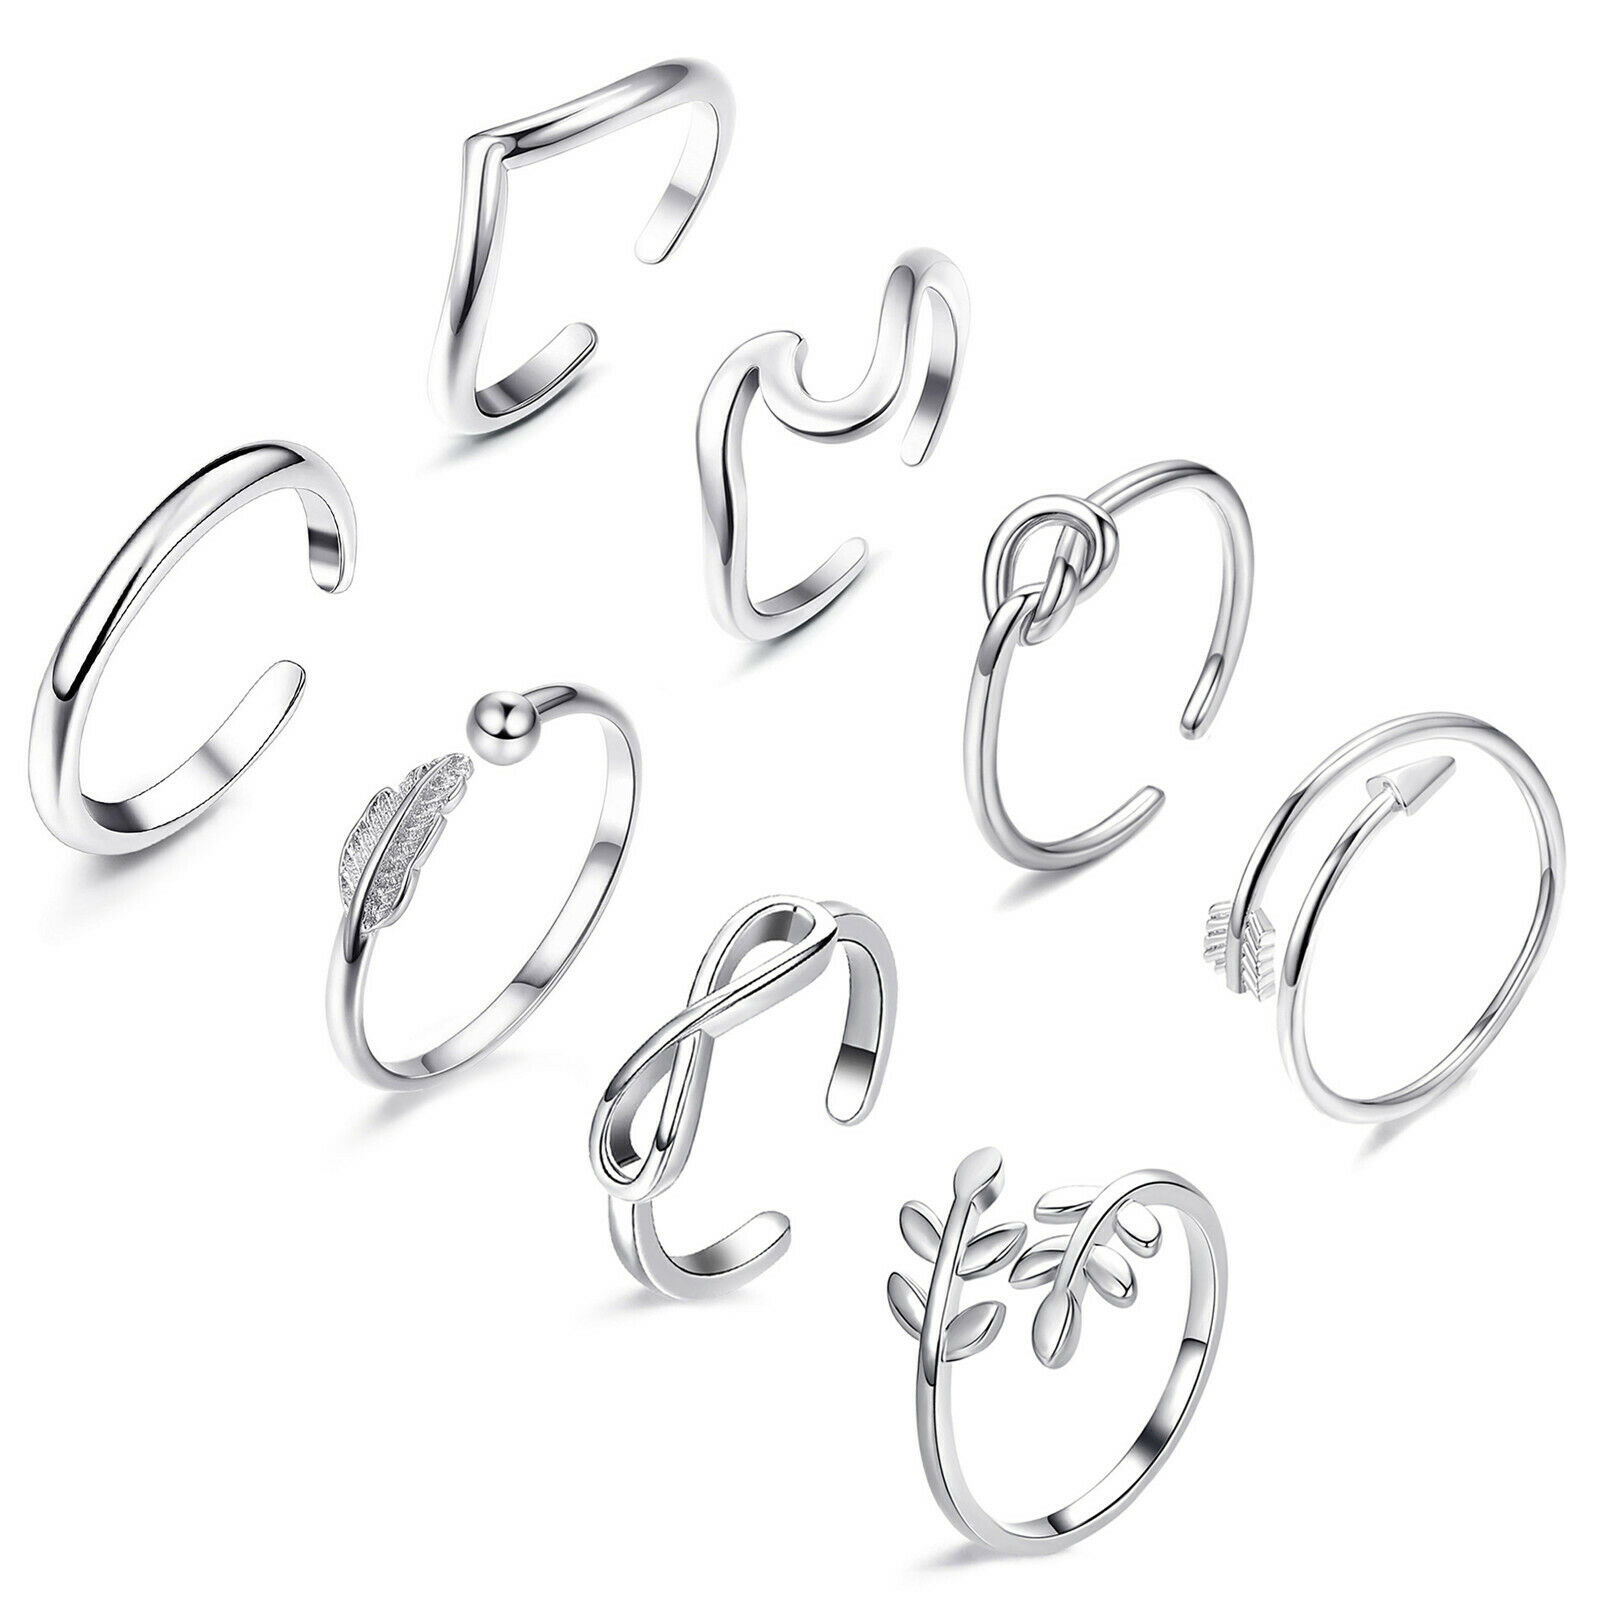 Wholesale 8pcs/set Jewelry Silver/gold/rose Gold Toe Rings Women Rings Gifts 02